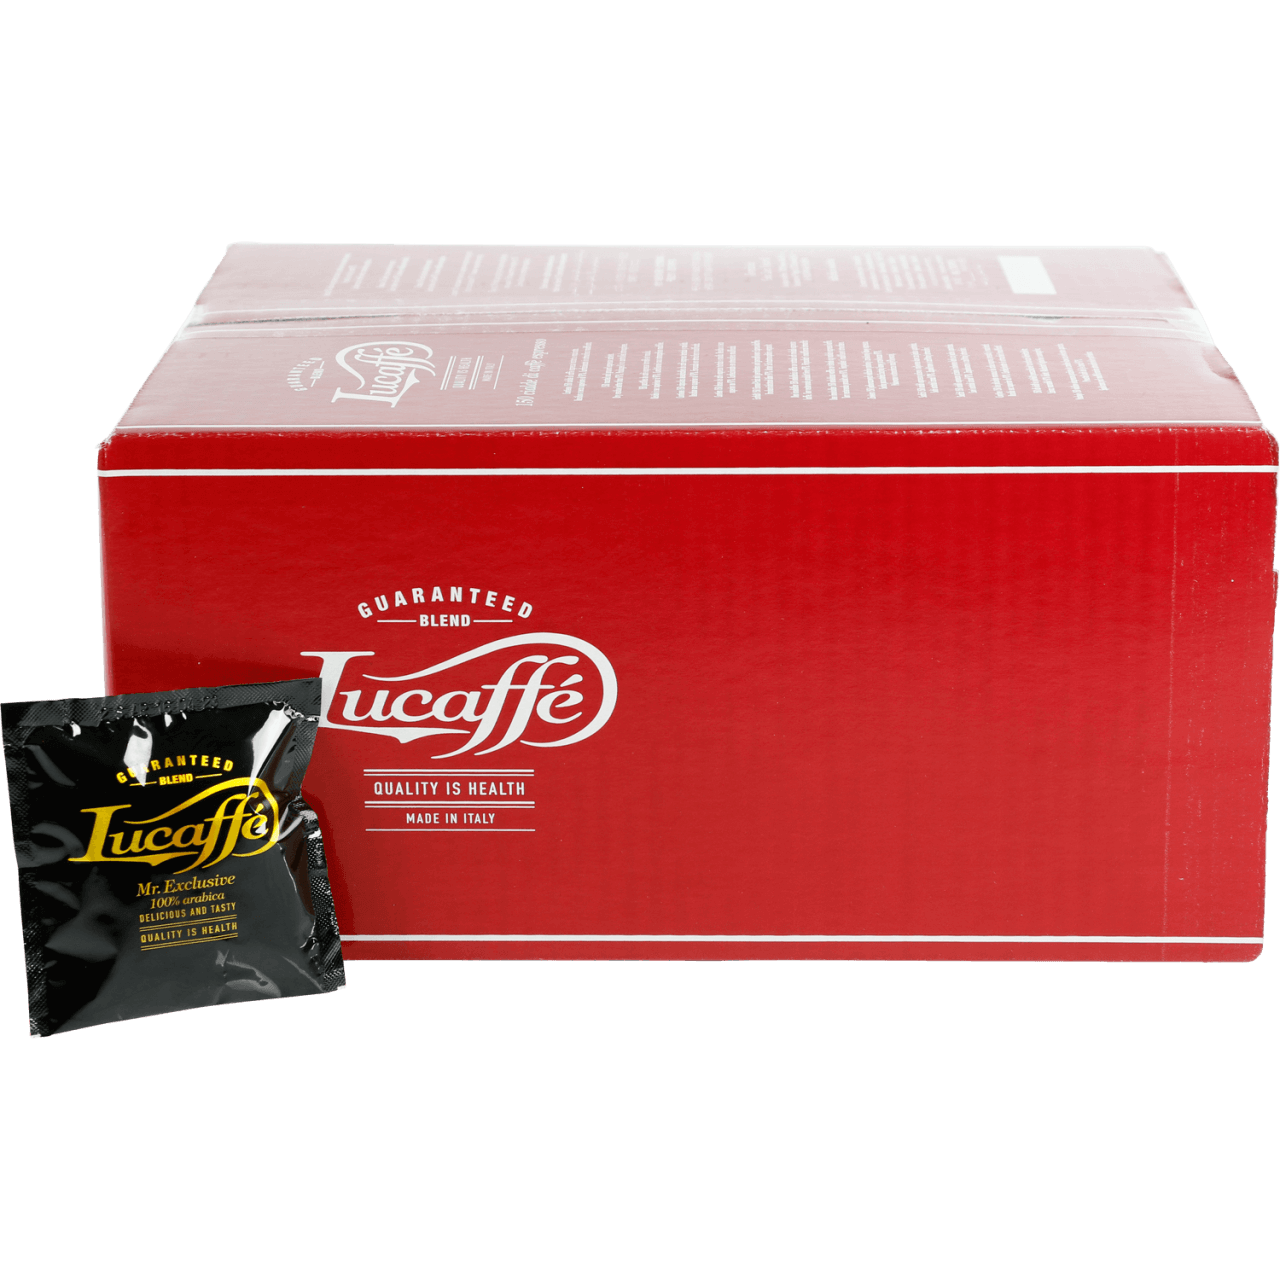 Lucaffe Mr. Exclusive ESE Pads 150 Stk